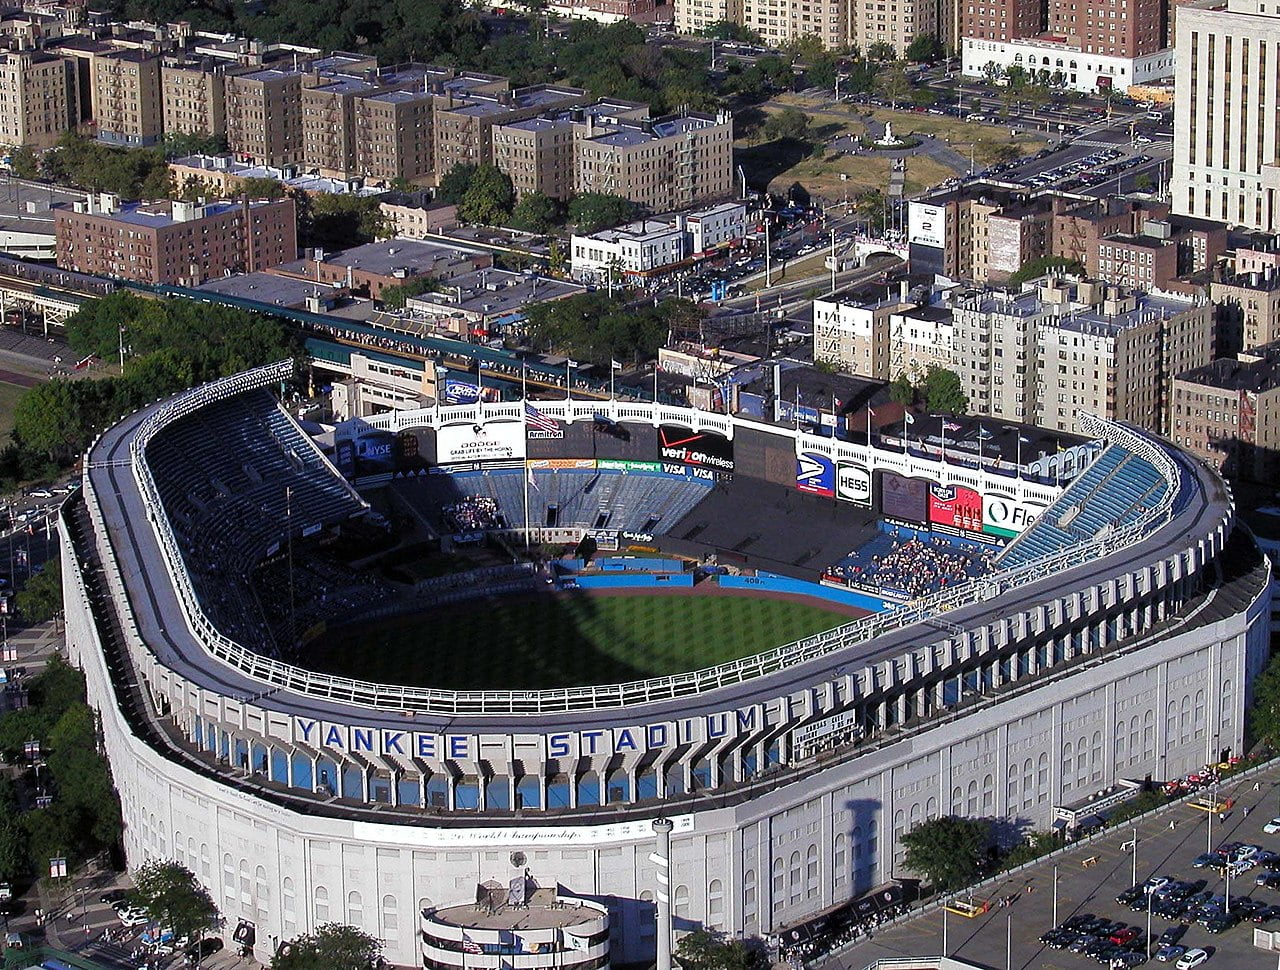 Yankee Stadium: The ultimate guide to the Bronx ballpark - Curbed NY